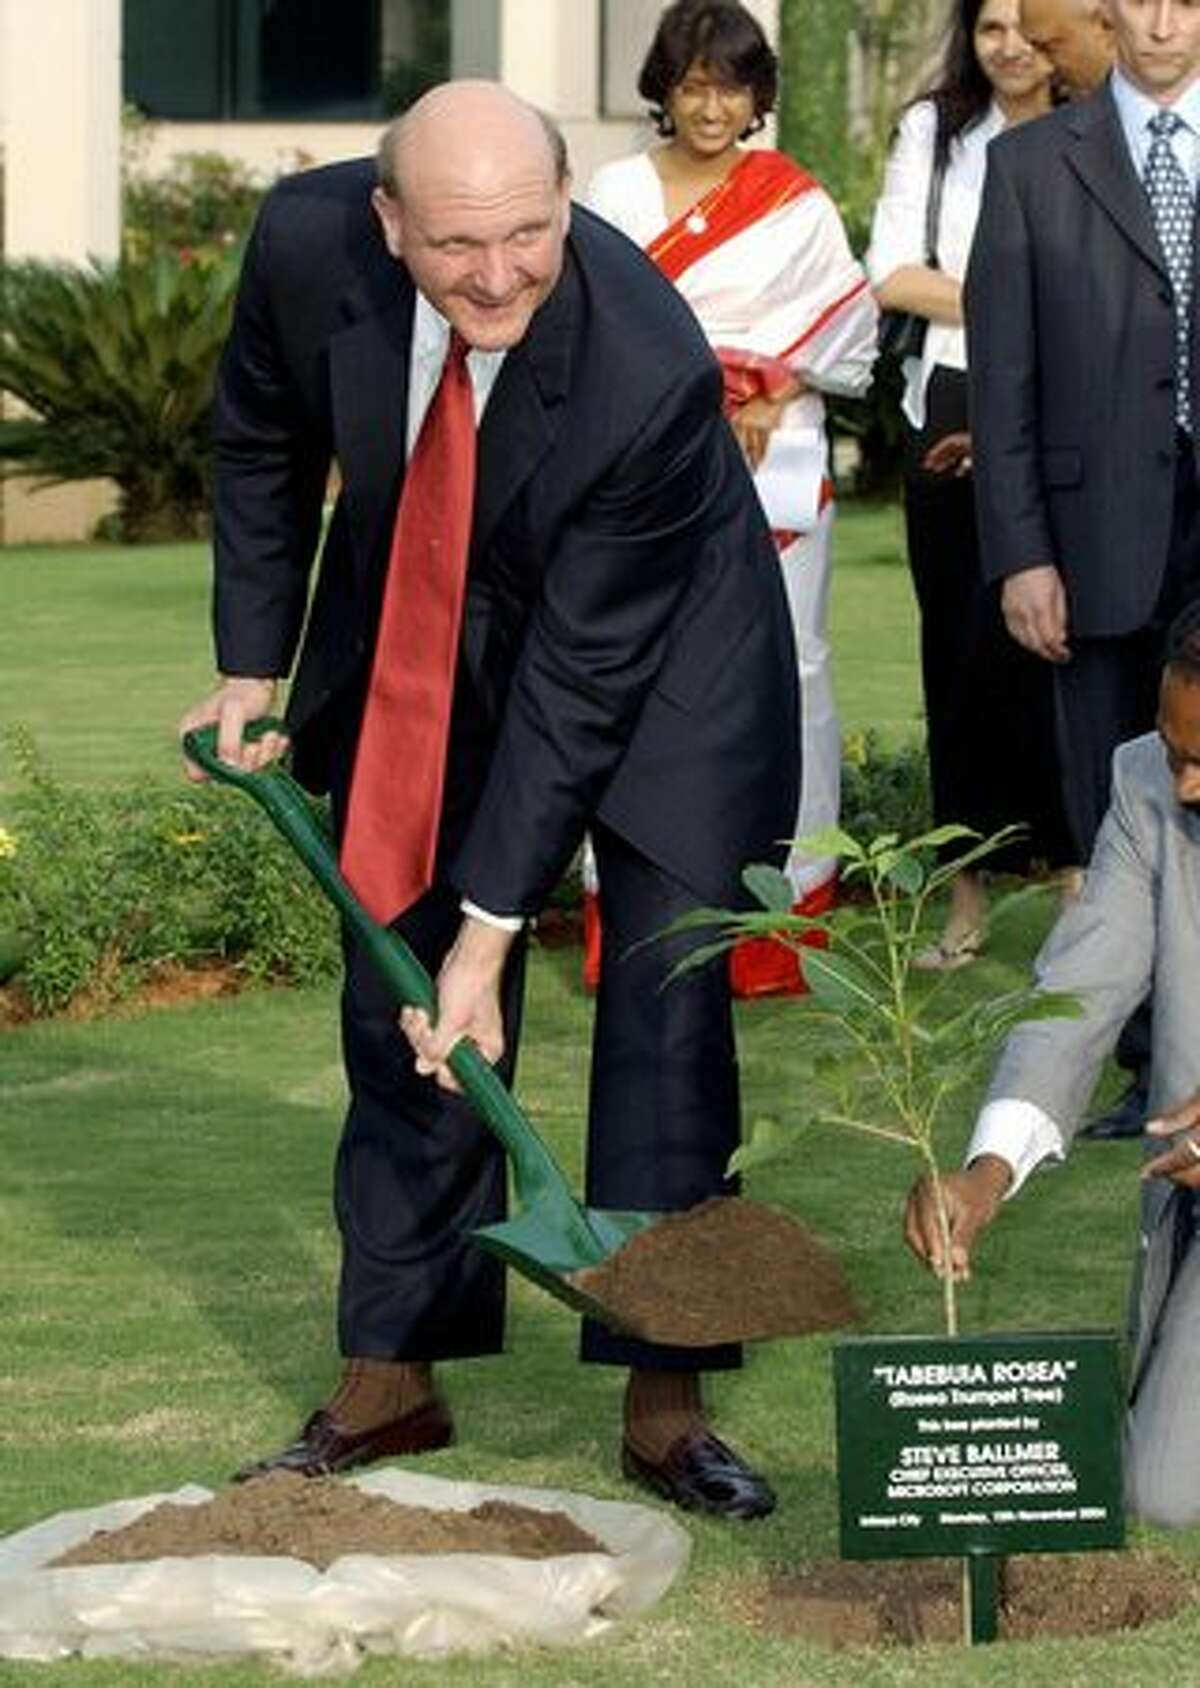 Ballmer helps plant a sapling at the Infosys campus Nov. 15, 2004, in Electronic City, Bangalore, India. Ballmer's Microsoft announced it would join with Indian software firm Infosys Technologies to provide software and consulting to manufacturing, banking and automobile companies and the companies will initially invest eight million dollars to develop a portfolio of services for companies worldwide.